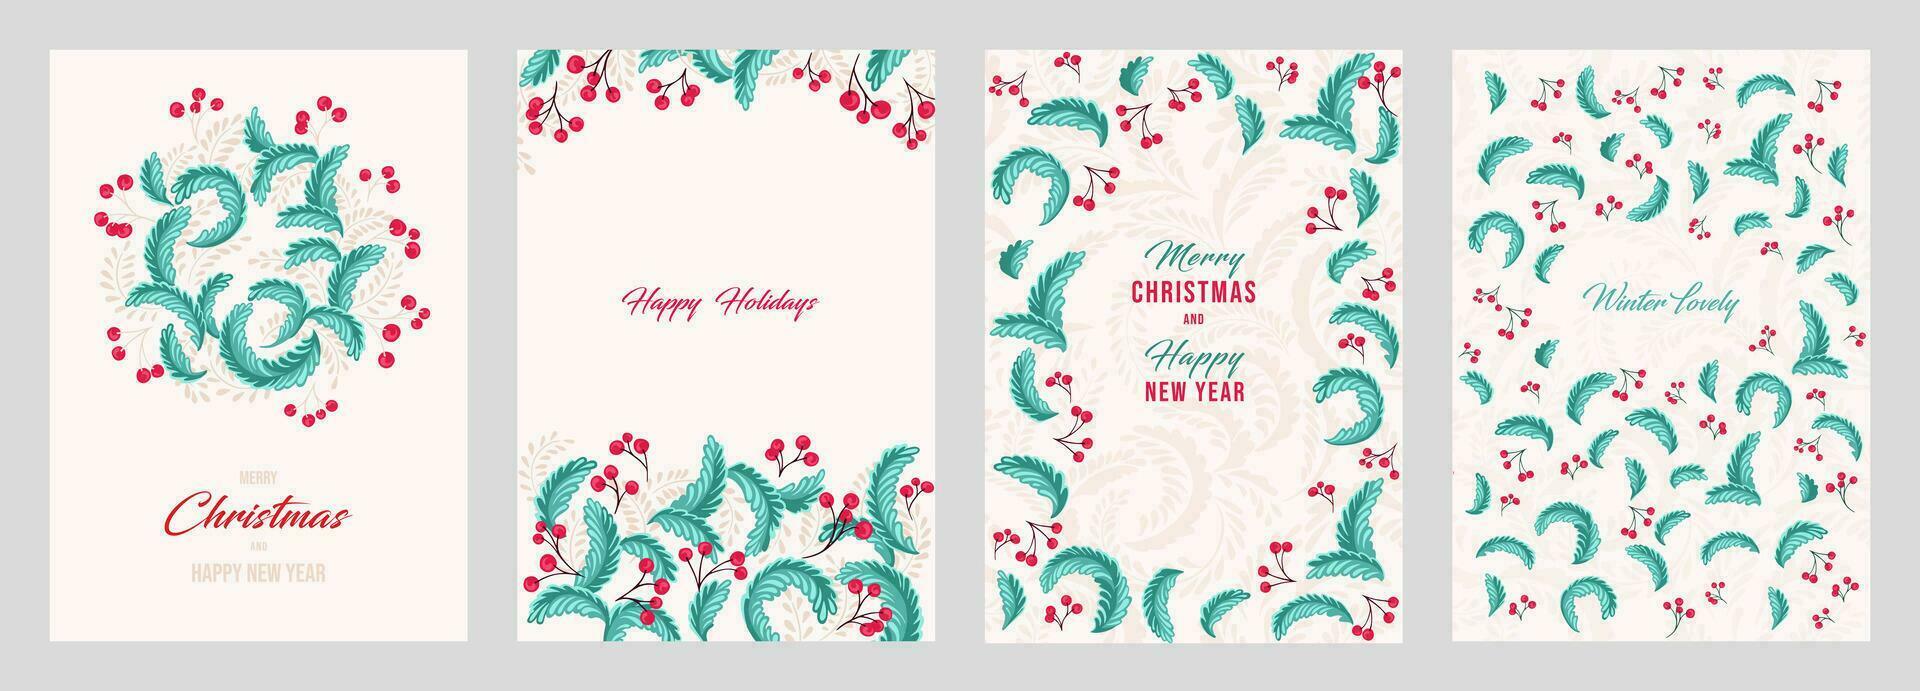 Set greeting cards Christmas, Happy New Year with vector hand drawn floral background. Winter Holidays template with copy space. Trendy retro style.  Illustration of printing, corporate invitation